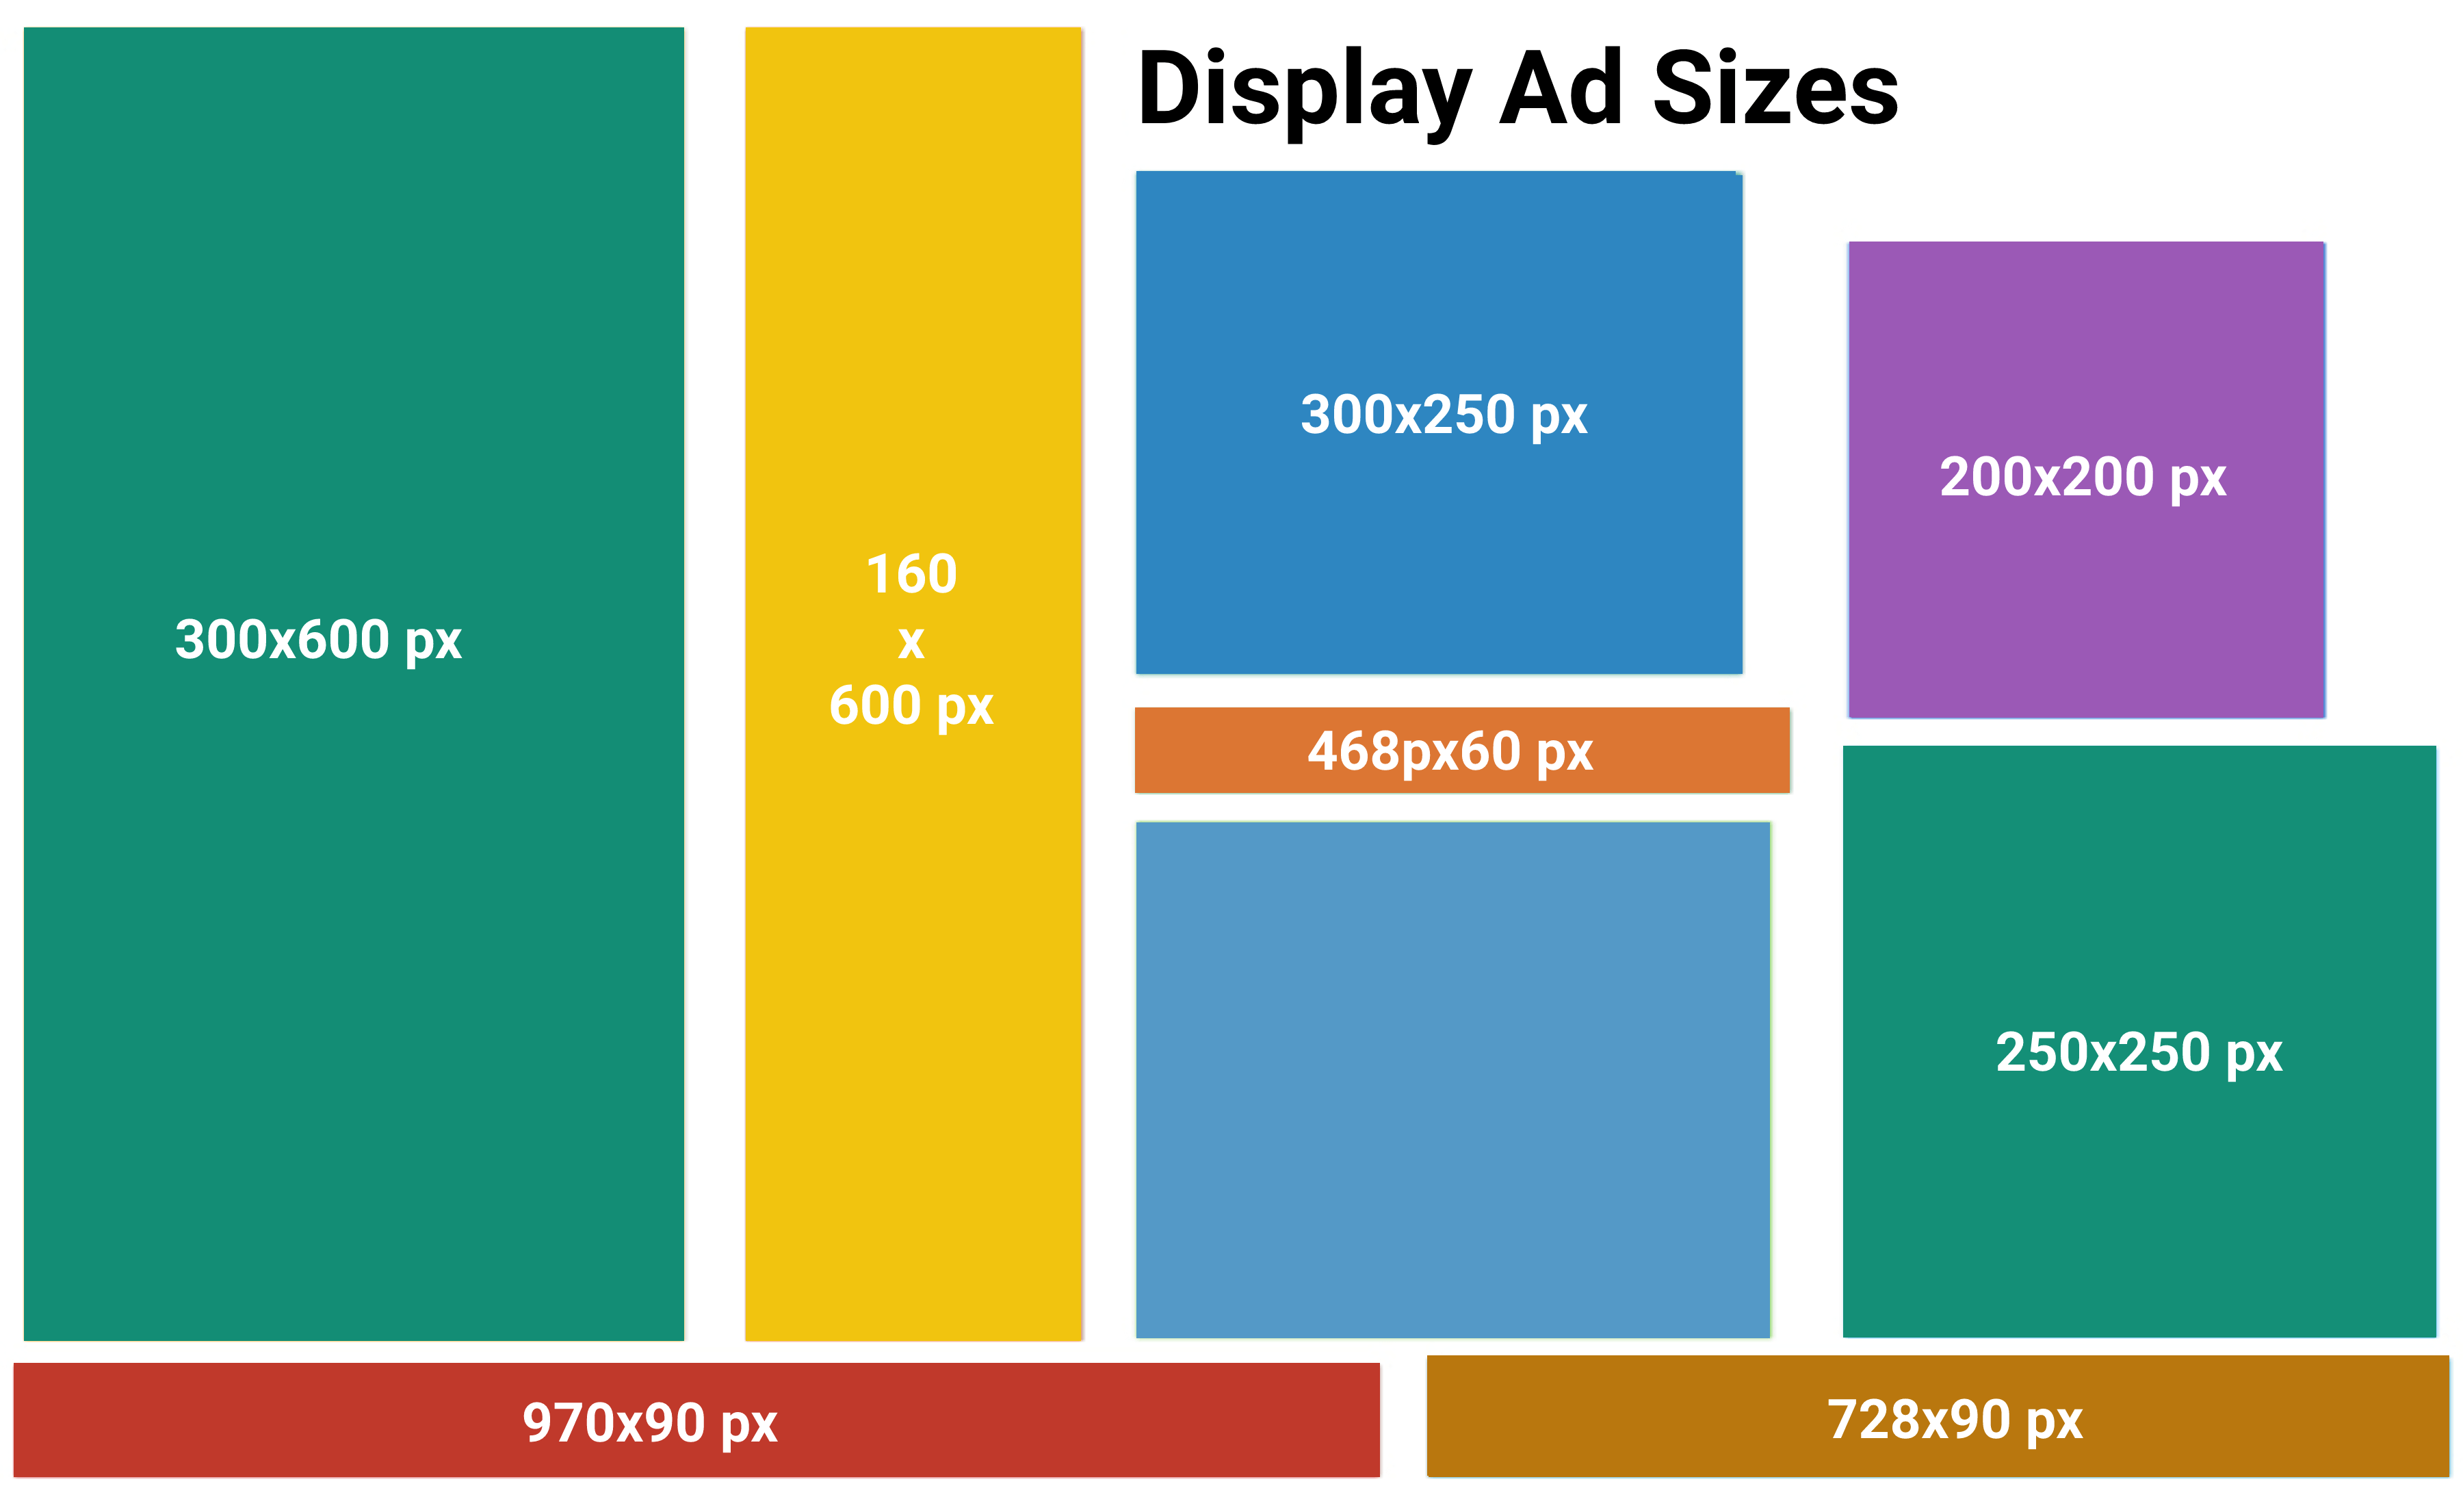 Display Ad Size